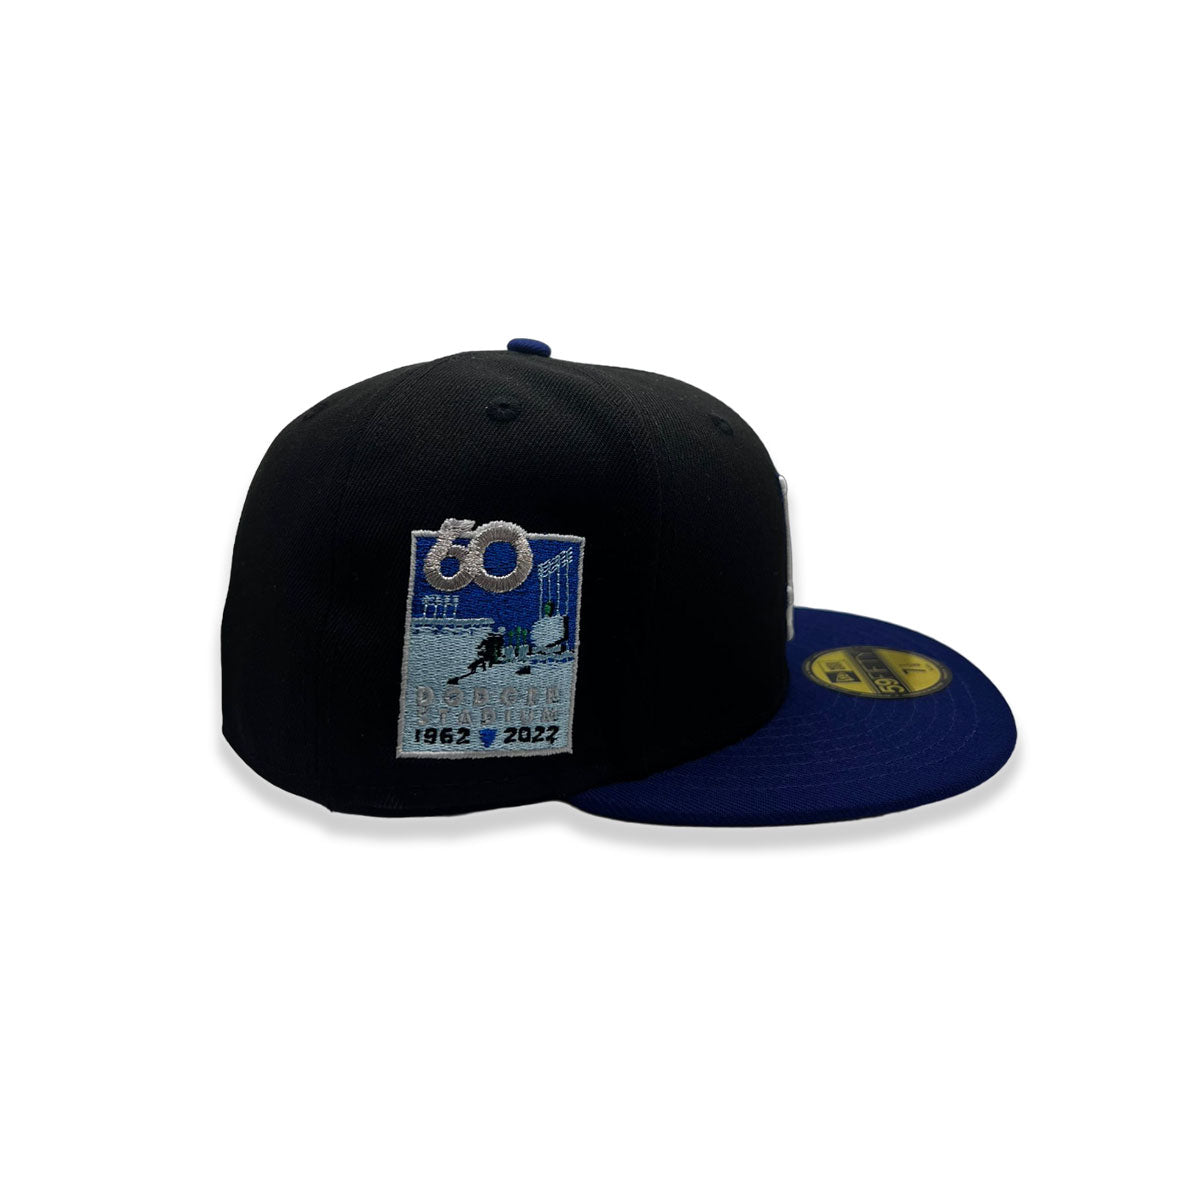 New Era LA Dodgers 60th Anniversry 1962-2022 Patch 59Fifty Fitted